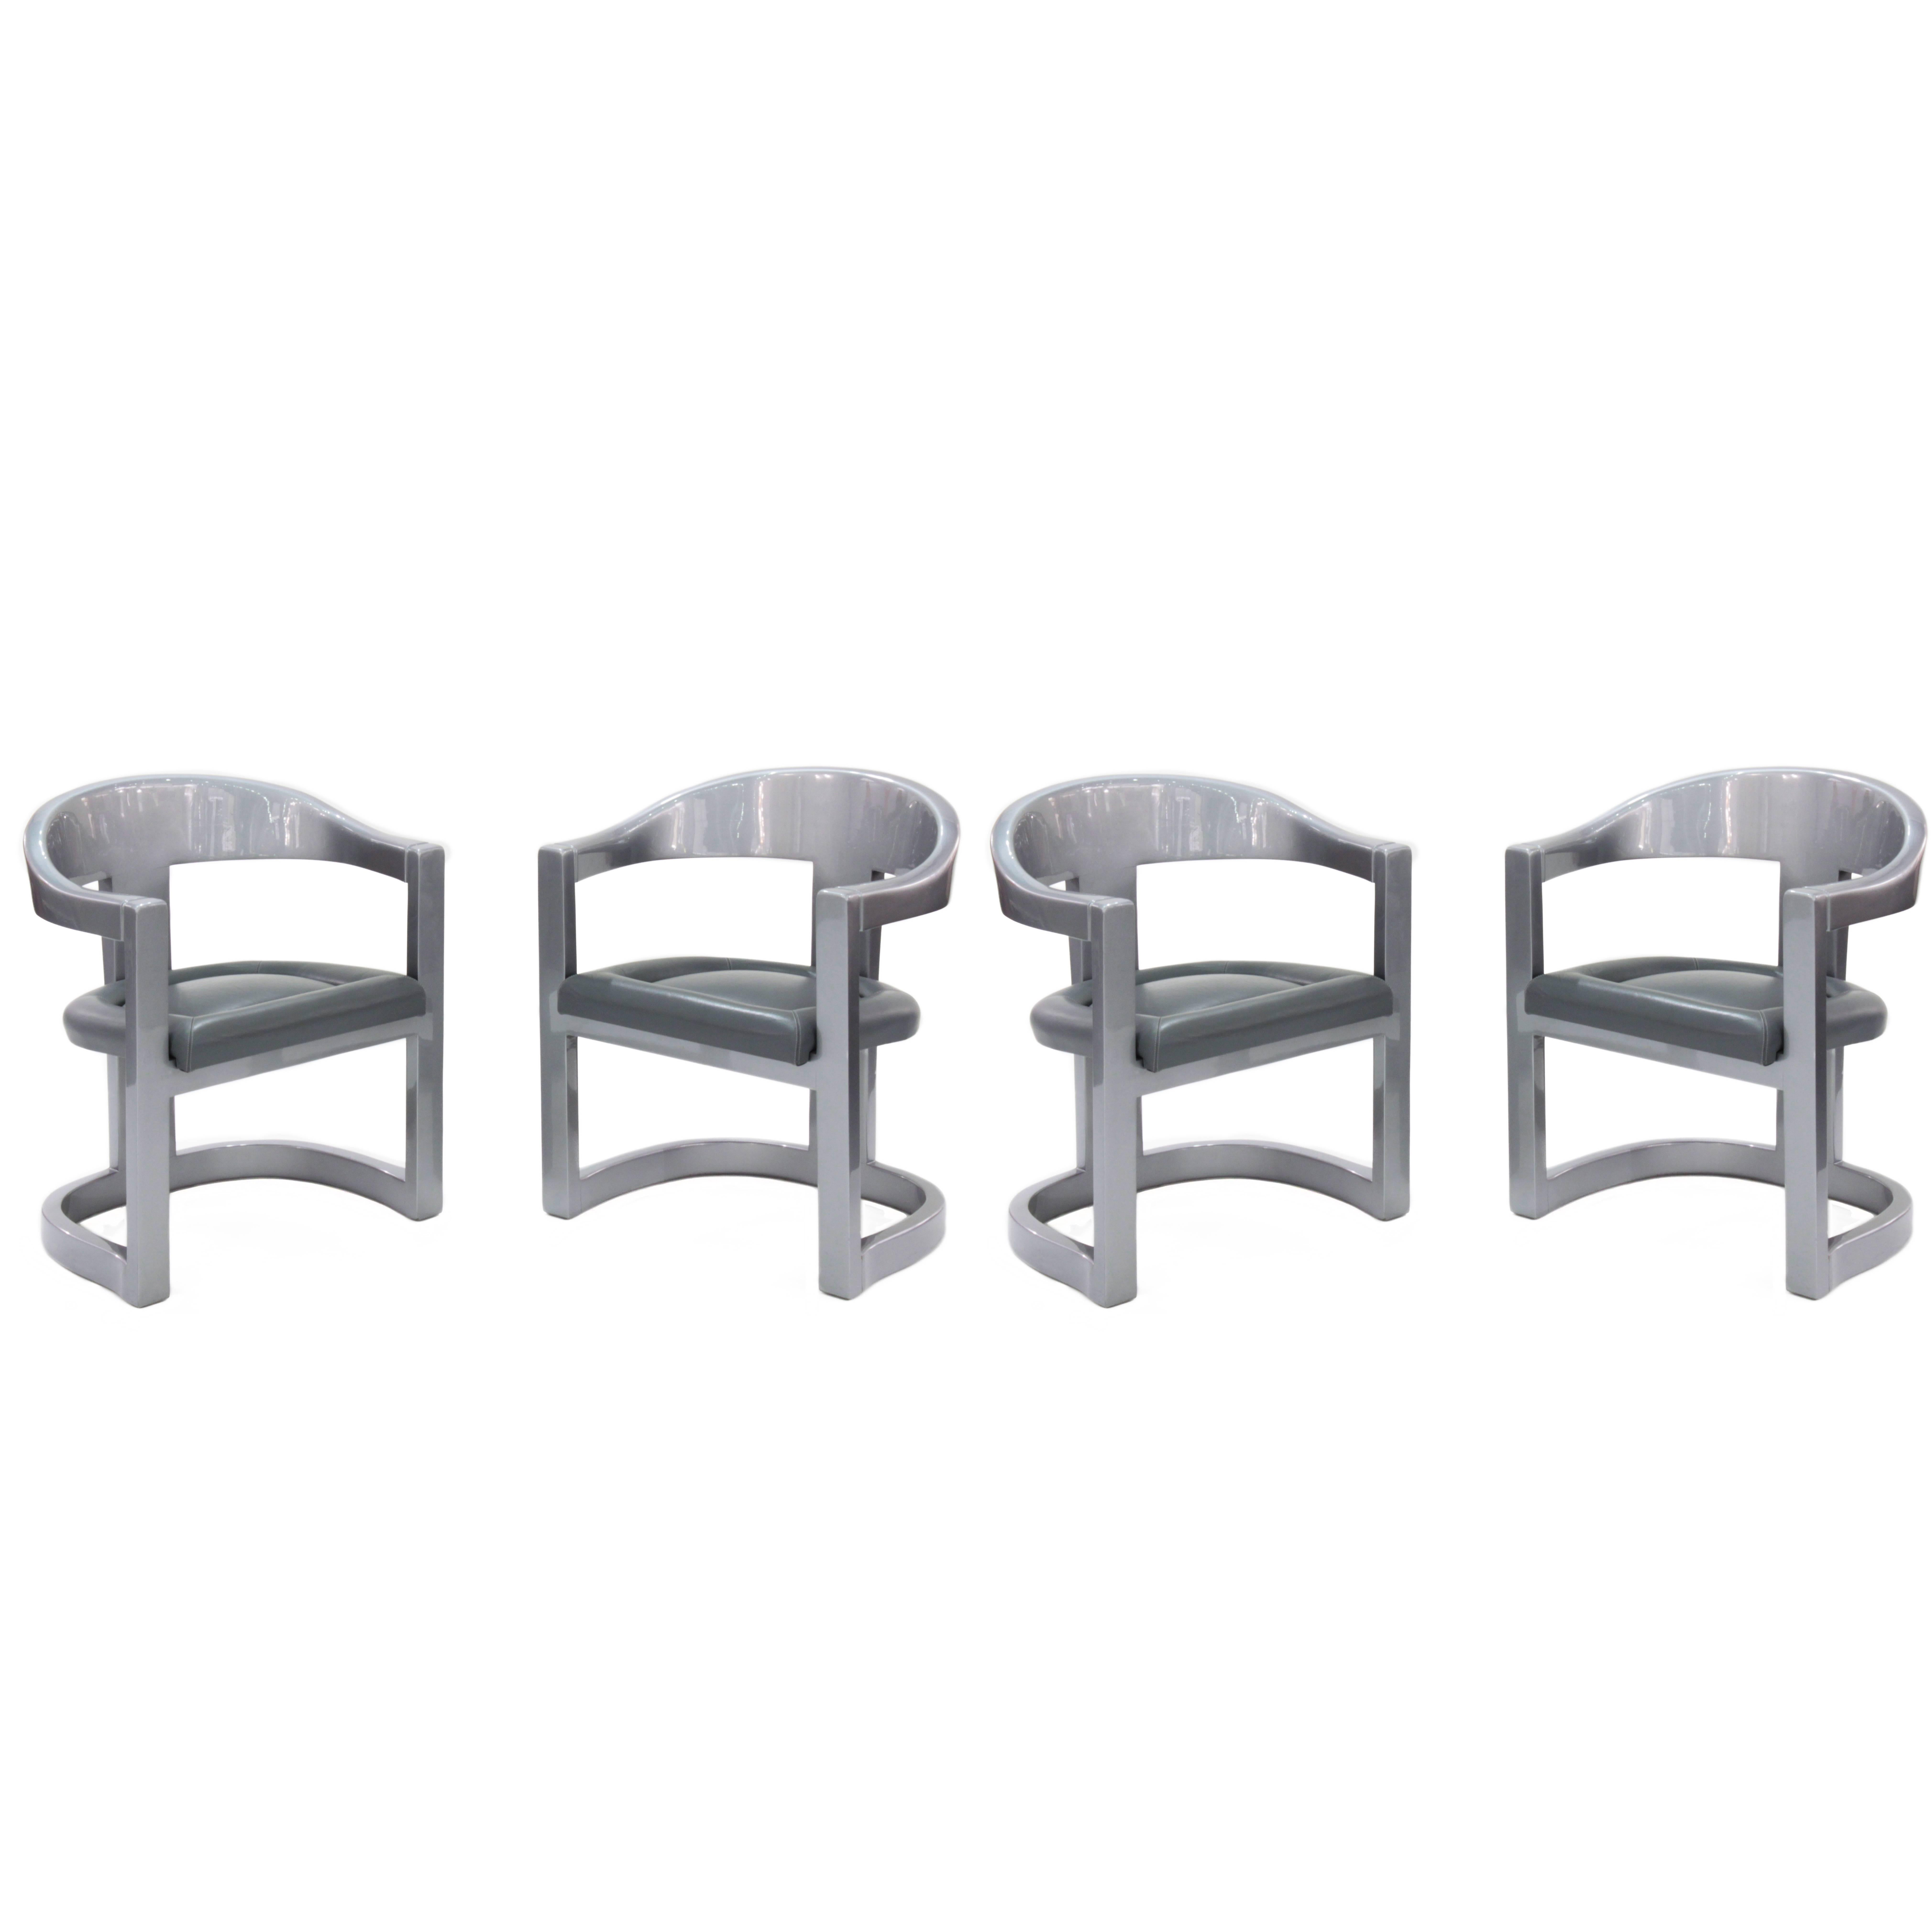 Set of Four Onassis Chairs in Metallic Gray Lacquer by Karl Springer